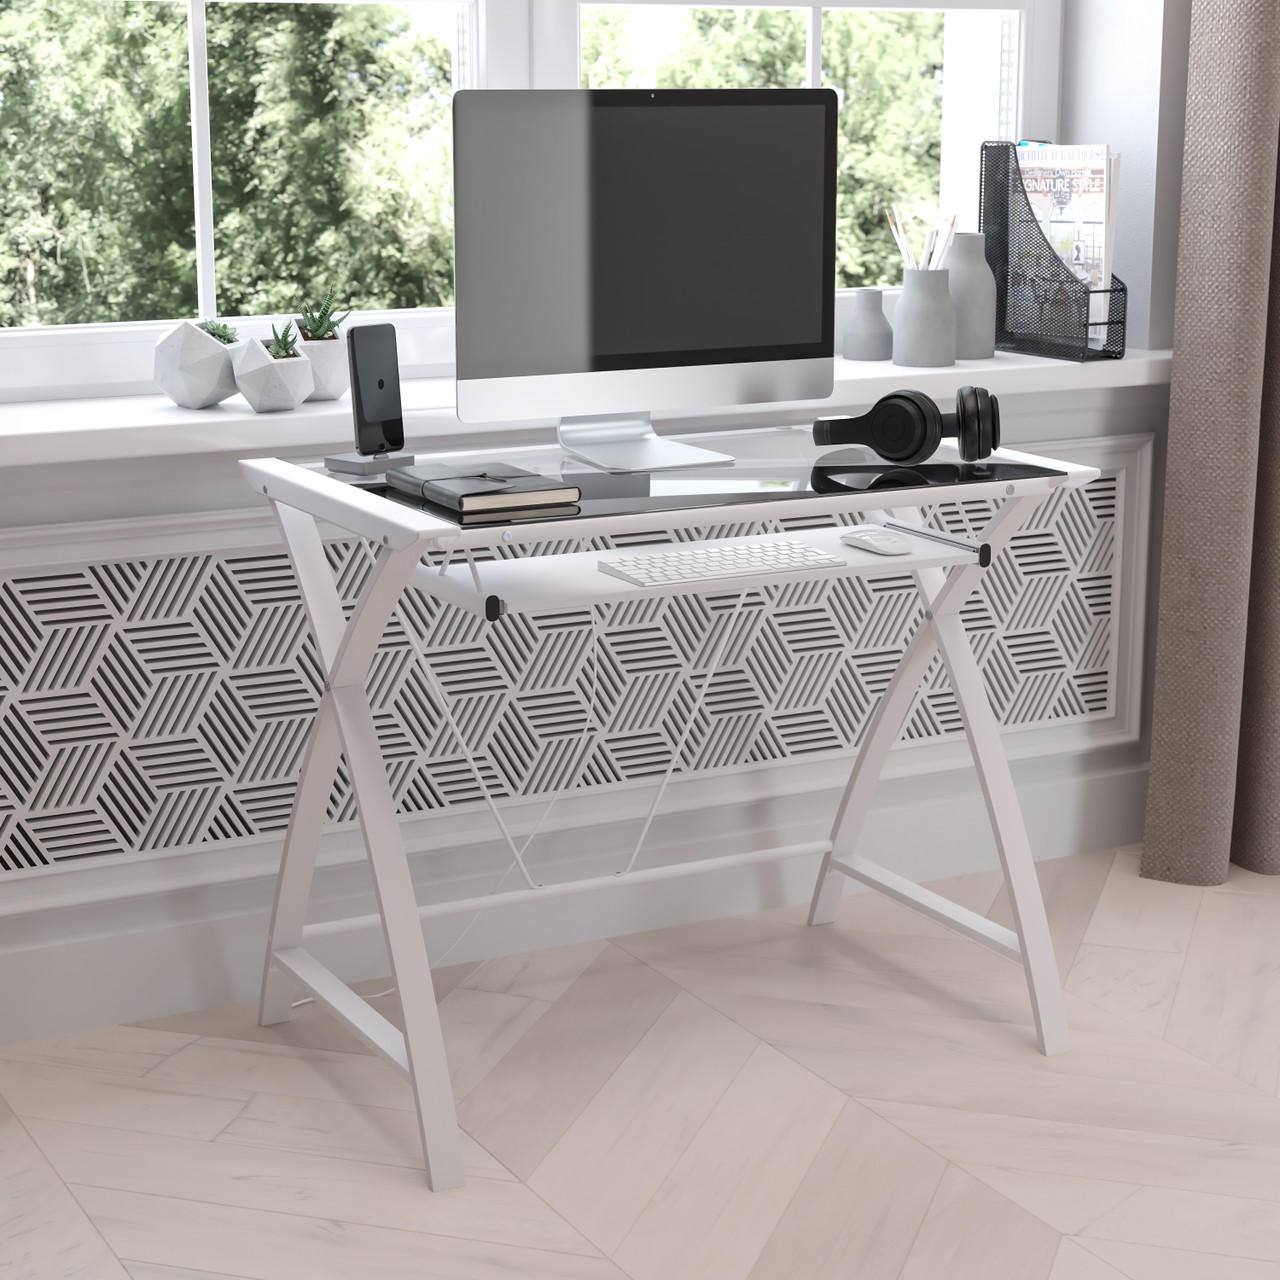  Flash Furniture Modern White Computer Desk with Glass Top 